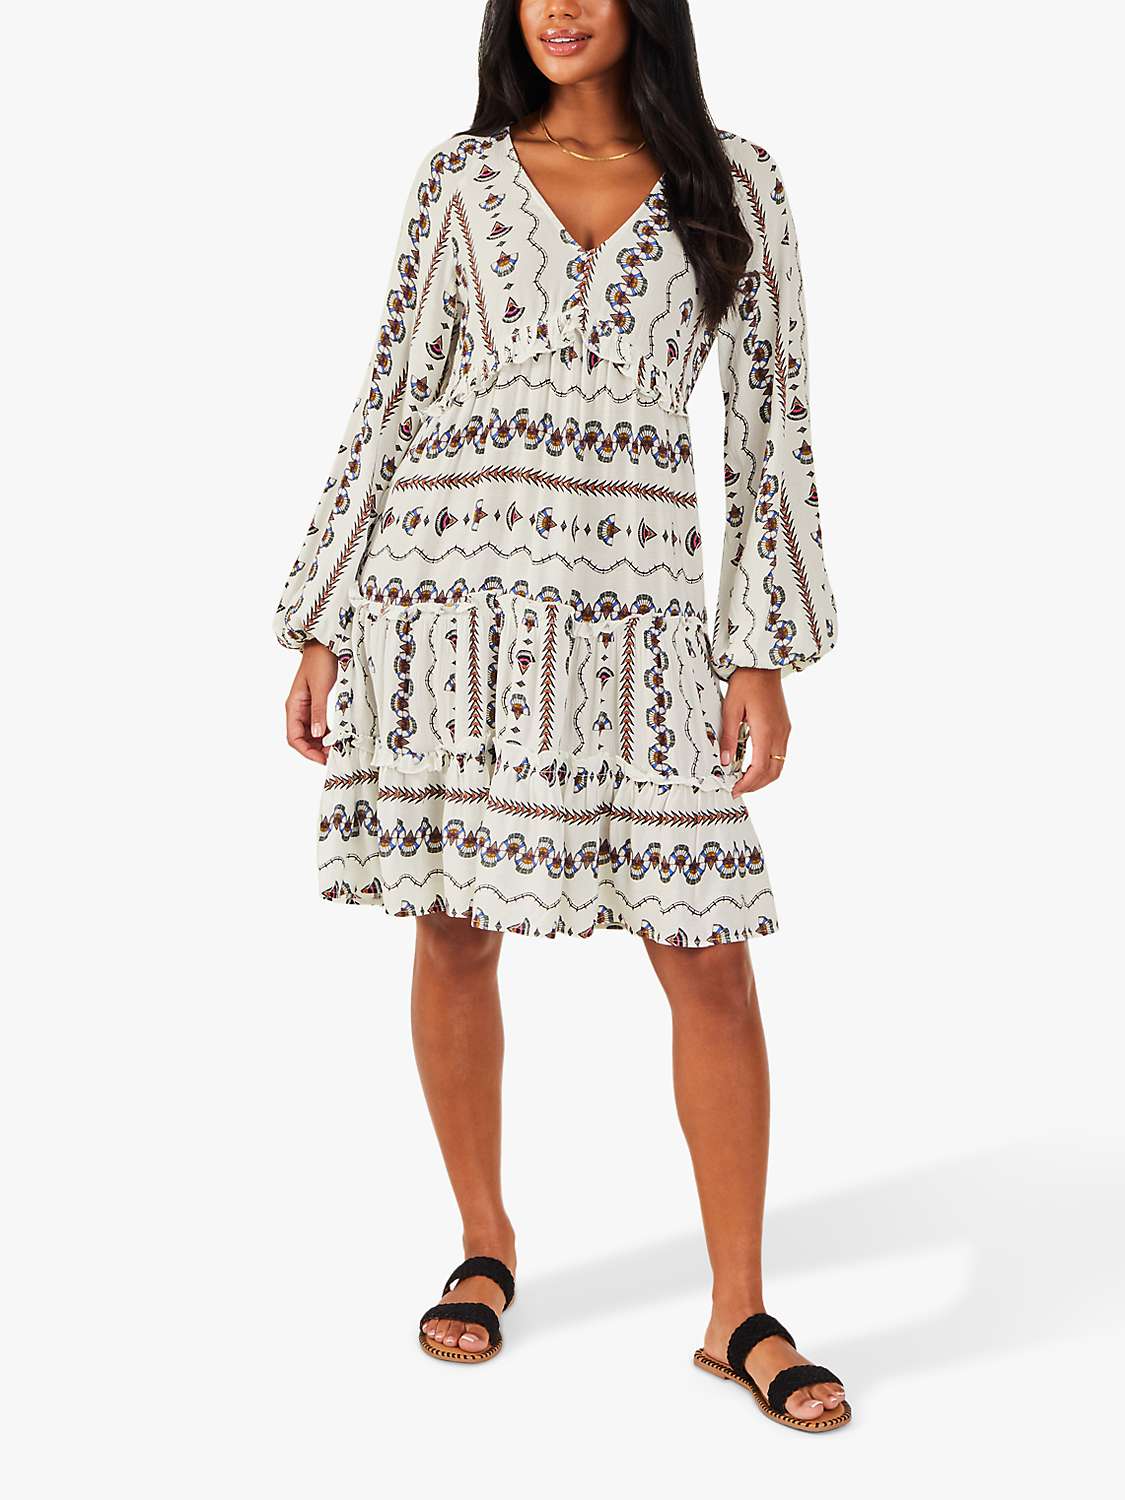 Buy Accessorize Fan Tiered Dress, White Online at johnlewis.com